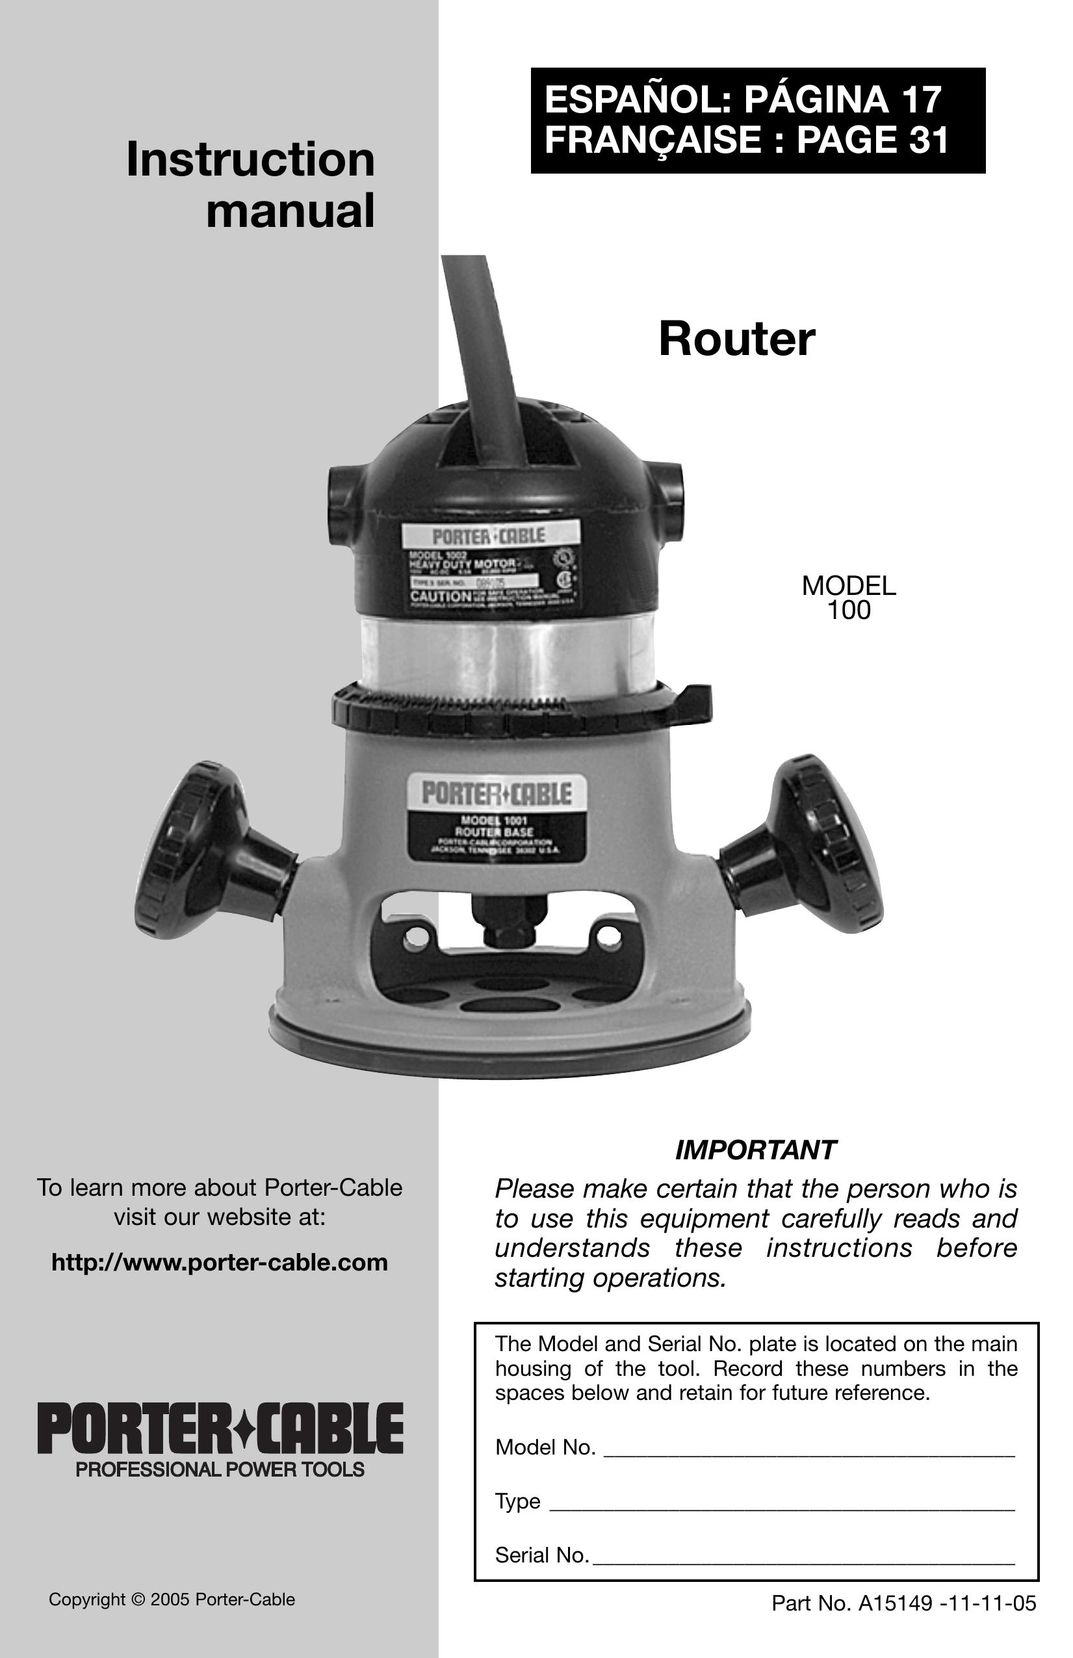 Porter-Cable A15149 Router User Manual